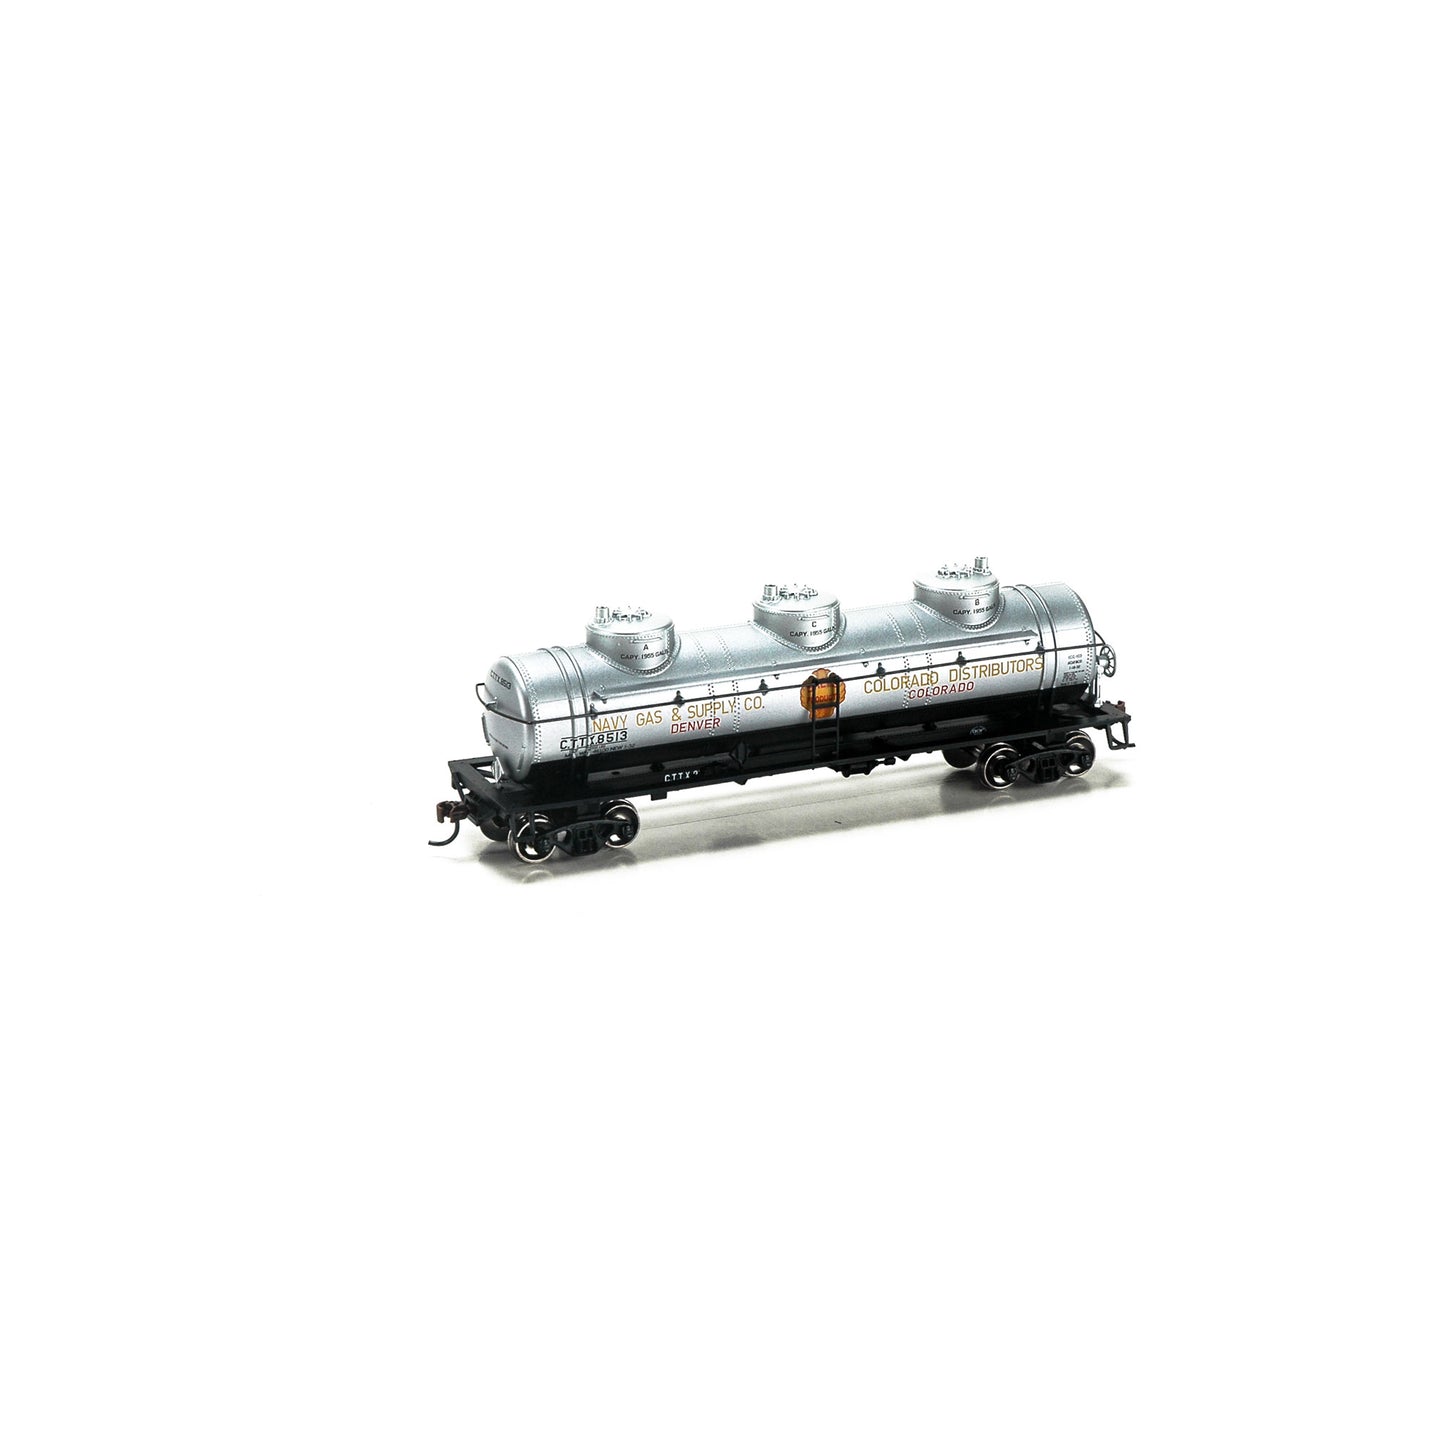 Roundhouse 74489 HO Navy Gas & Supply 3-Dome Tank Car #8513